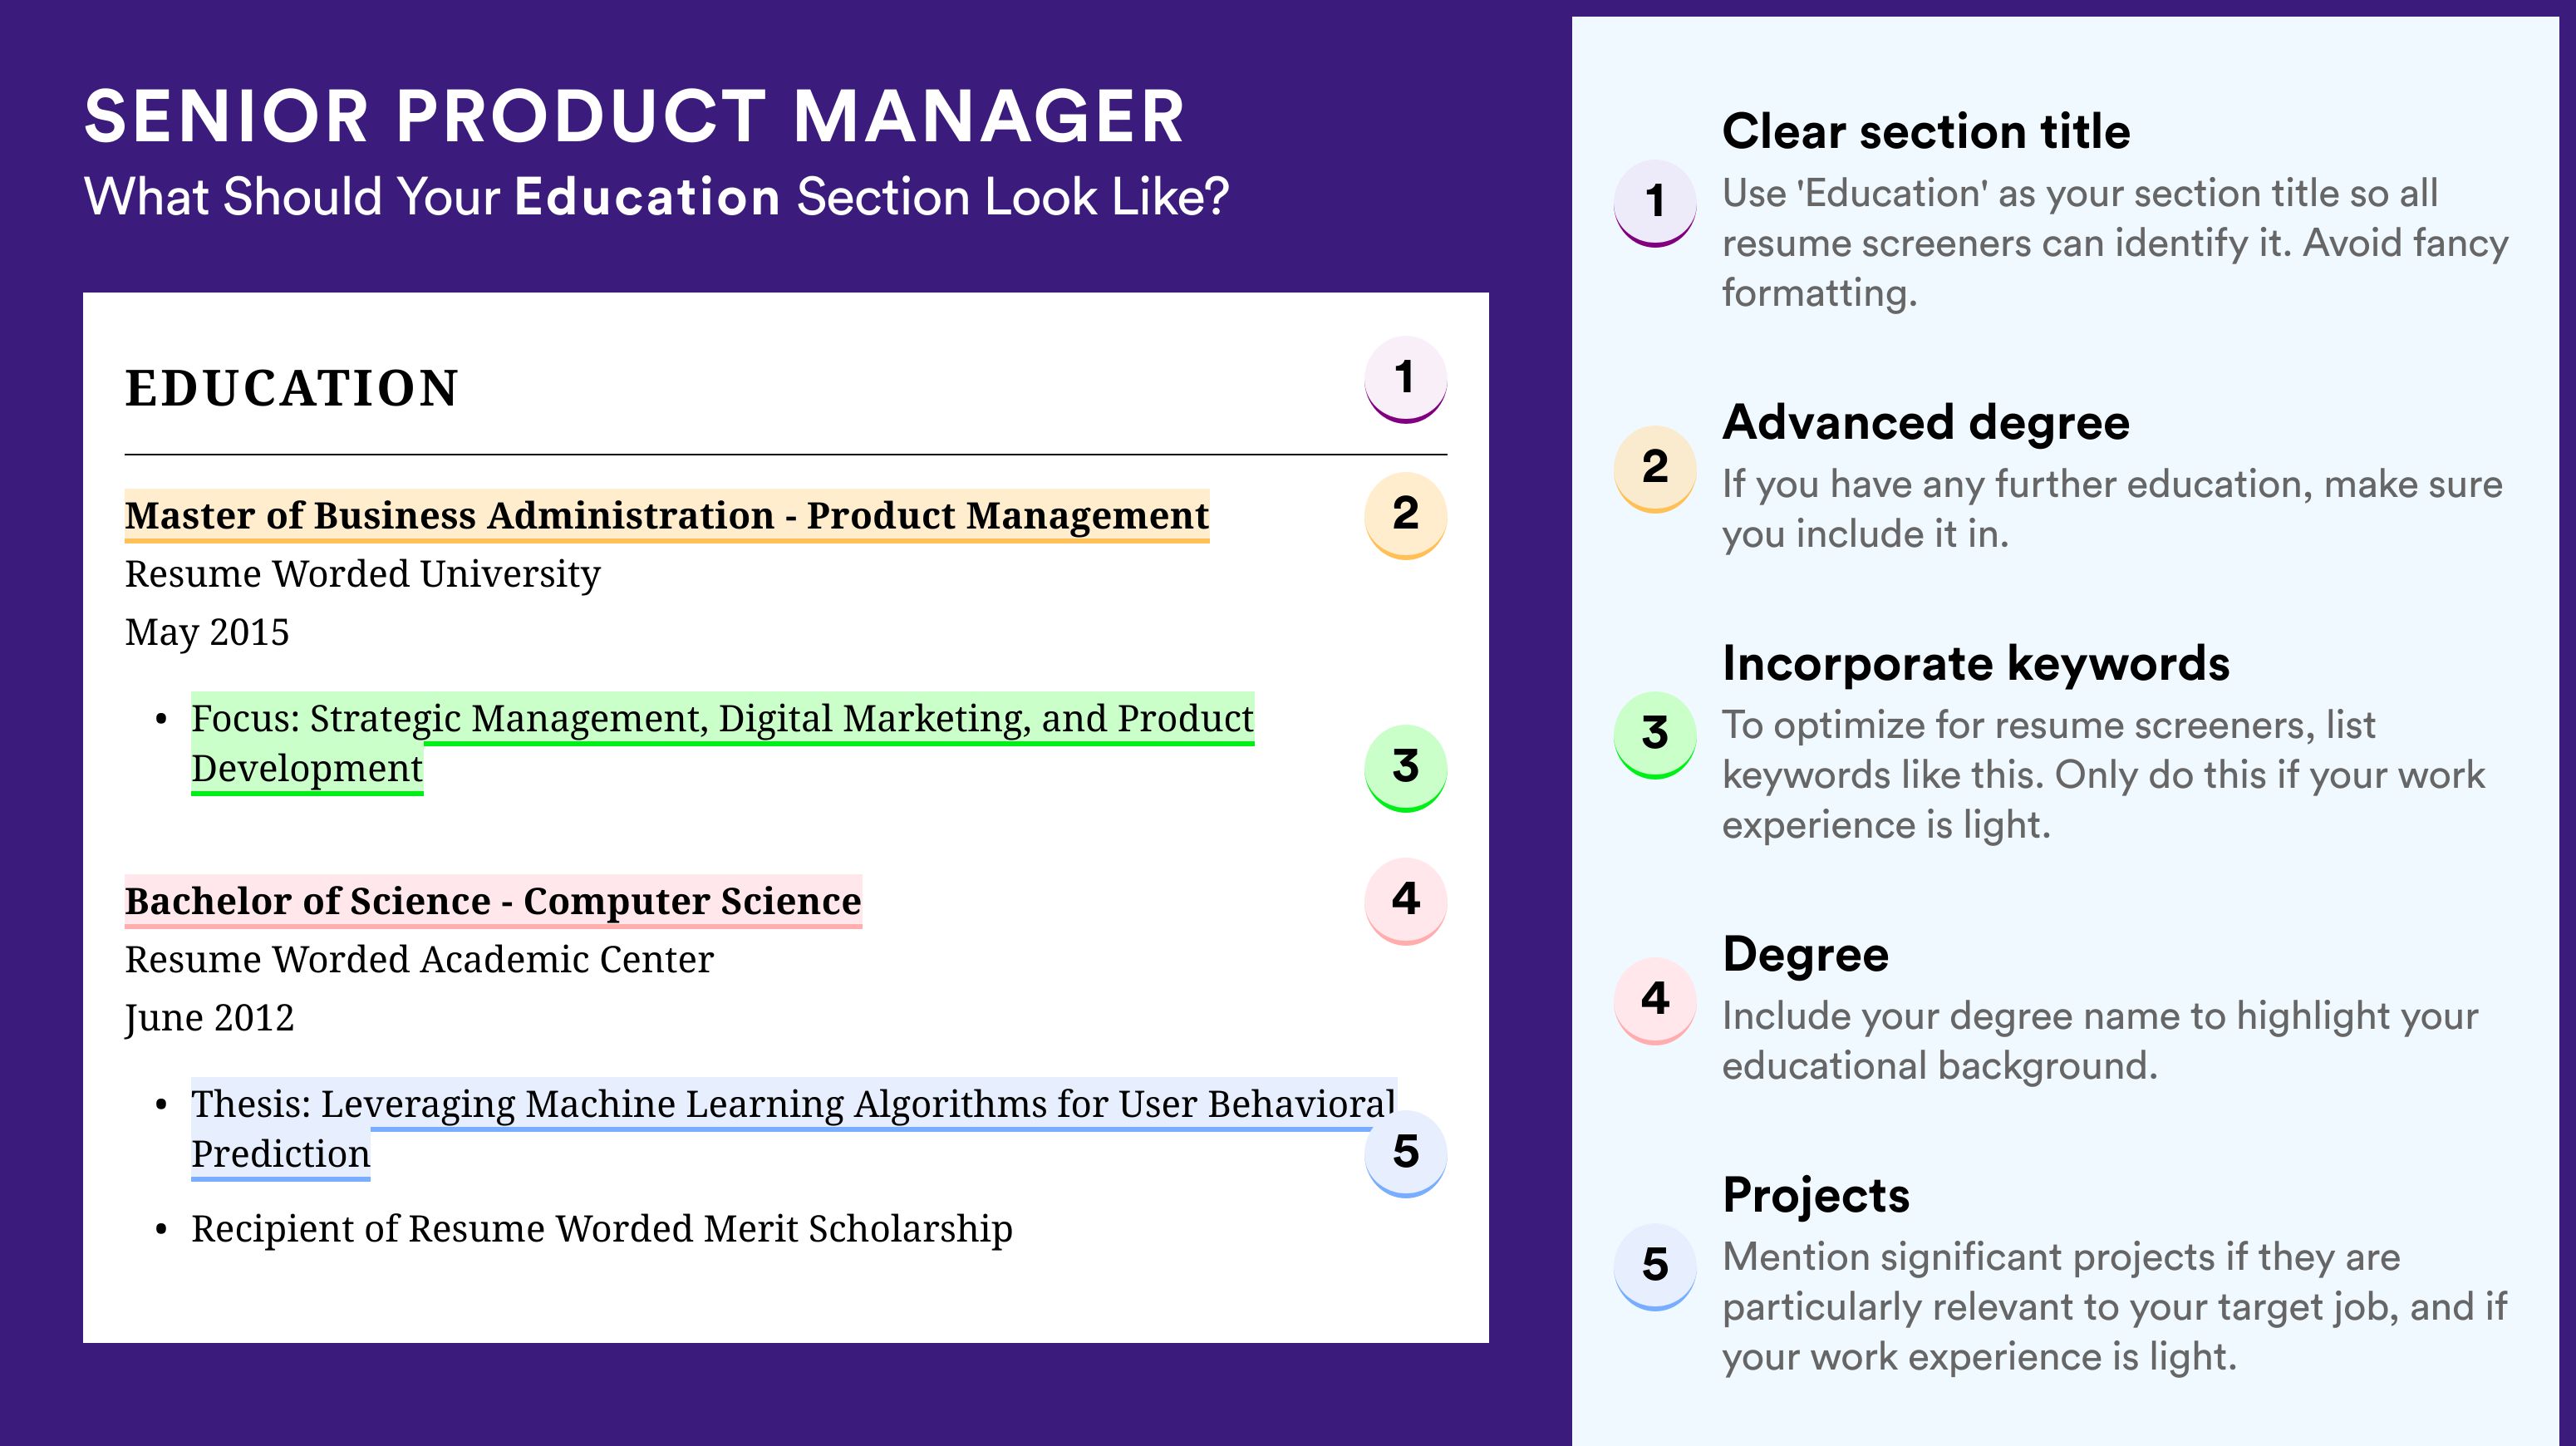 How To Write An Education Section - Senior Product Manager Roles